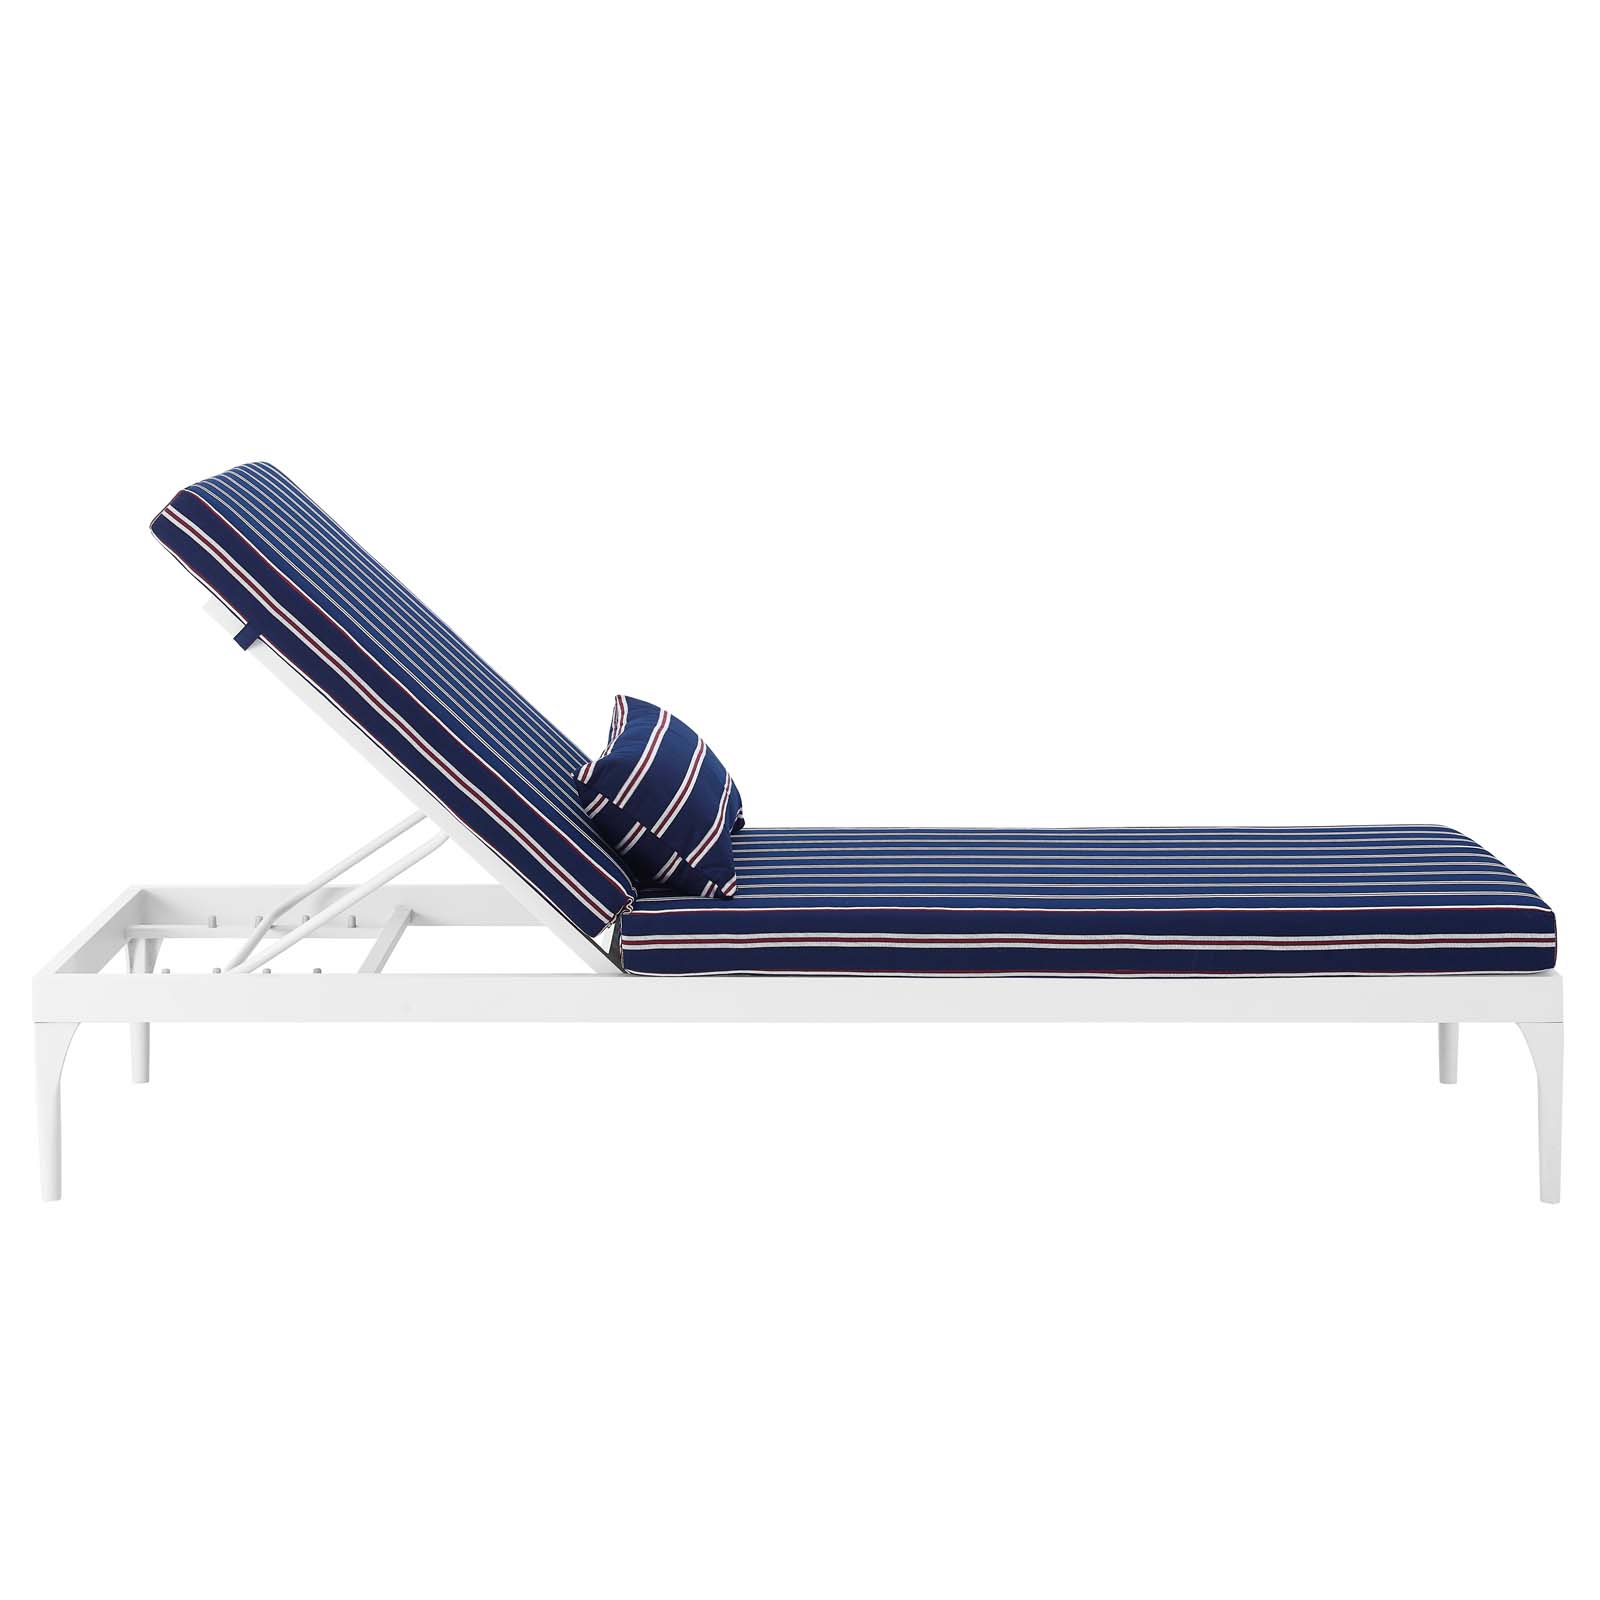 Modern Contemporary Urban Design Outdoor Patio Balcony Garden Furniture Lounge Chair Chaise, Fabric Metal Steel, White Navy - image 5 of 7